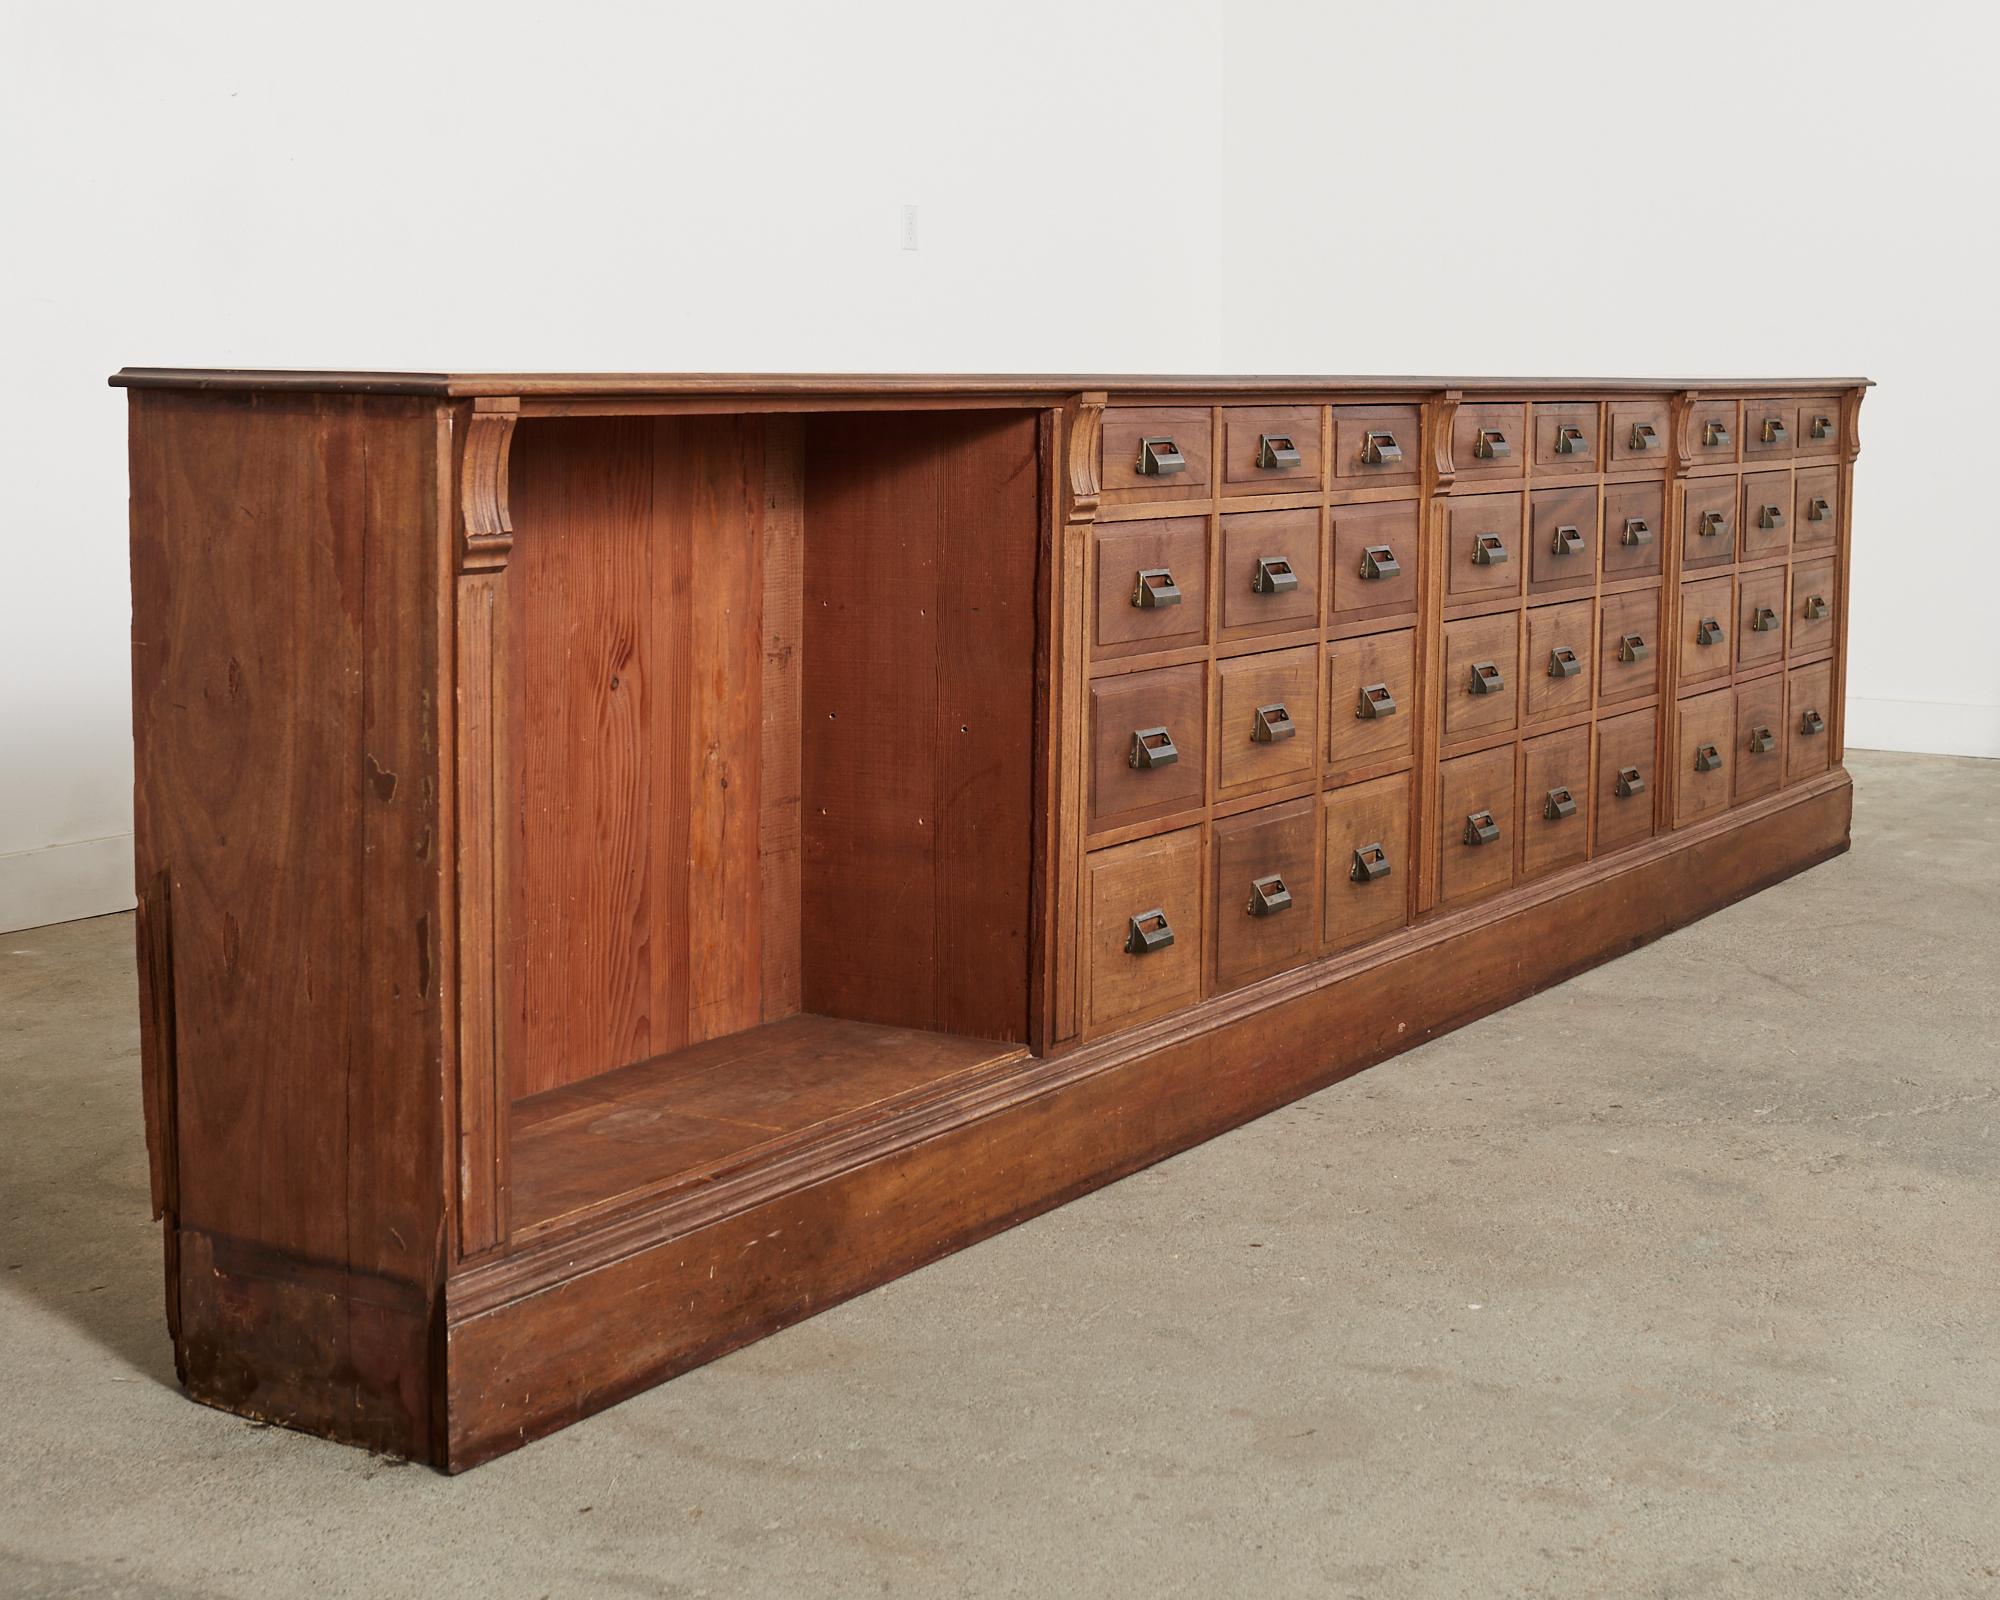 Grand late 19th/early 20th century apothecary cabinet chest of drawers featuring 36 storage drawers with patinated brass pulls. The monumental cabinet measures over 15 feet long and is purported to be from a haberdashery in England then used in an